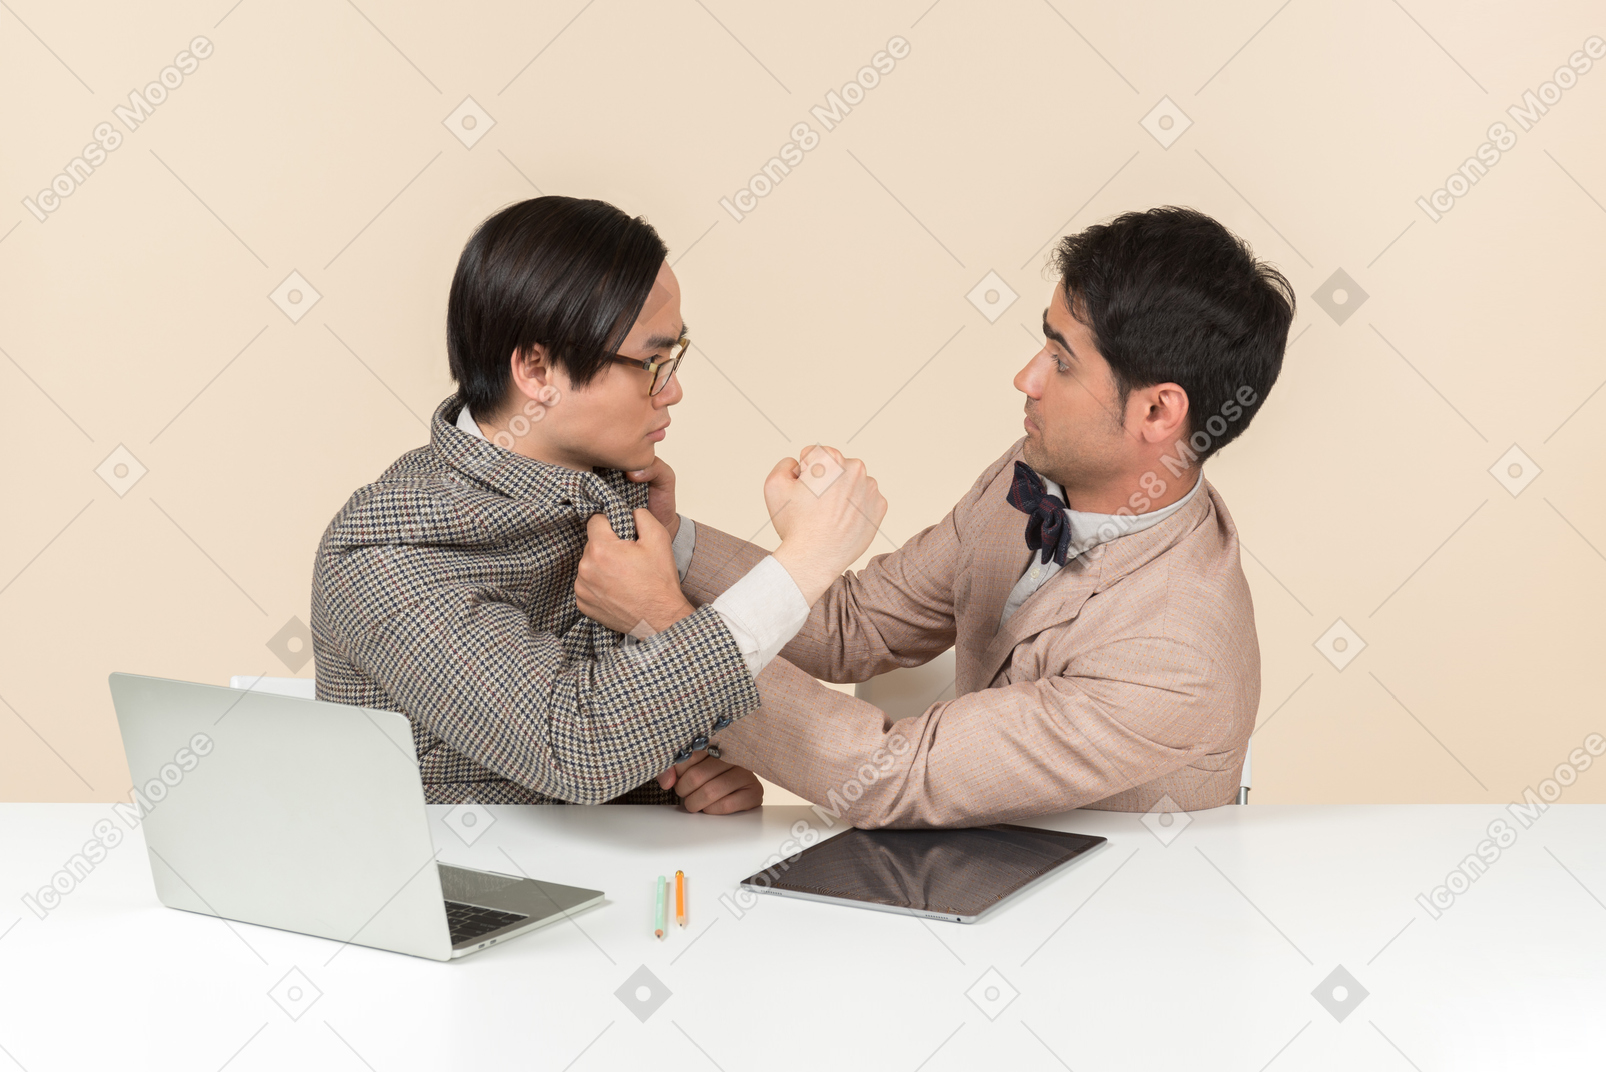 Two young nerds sitting at the table and punching each other into the face